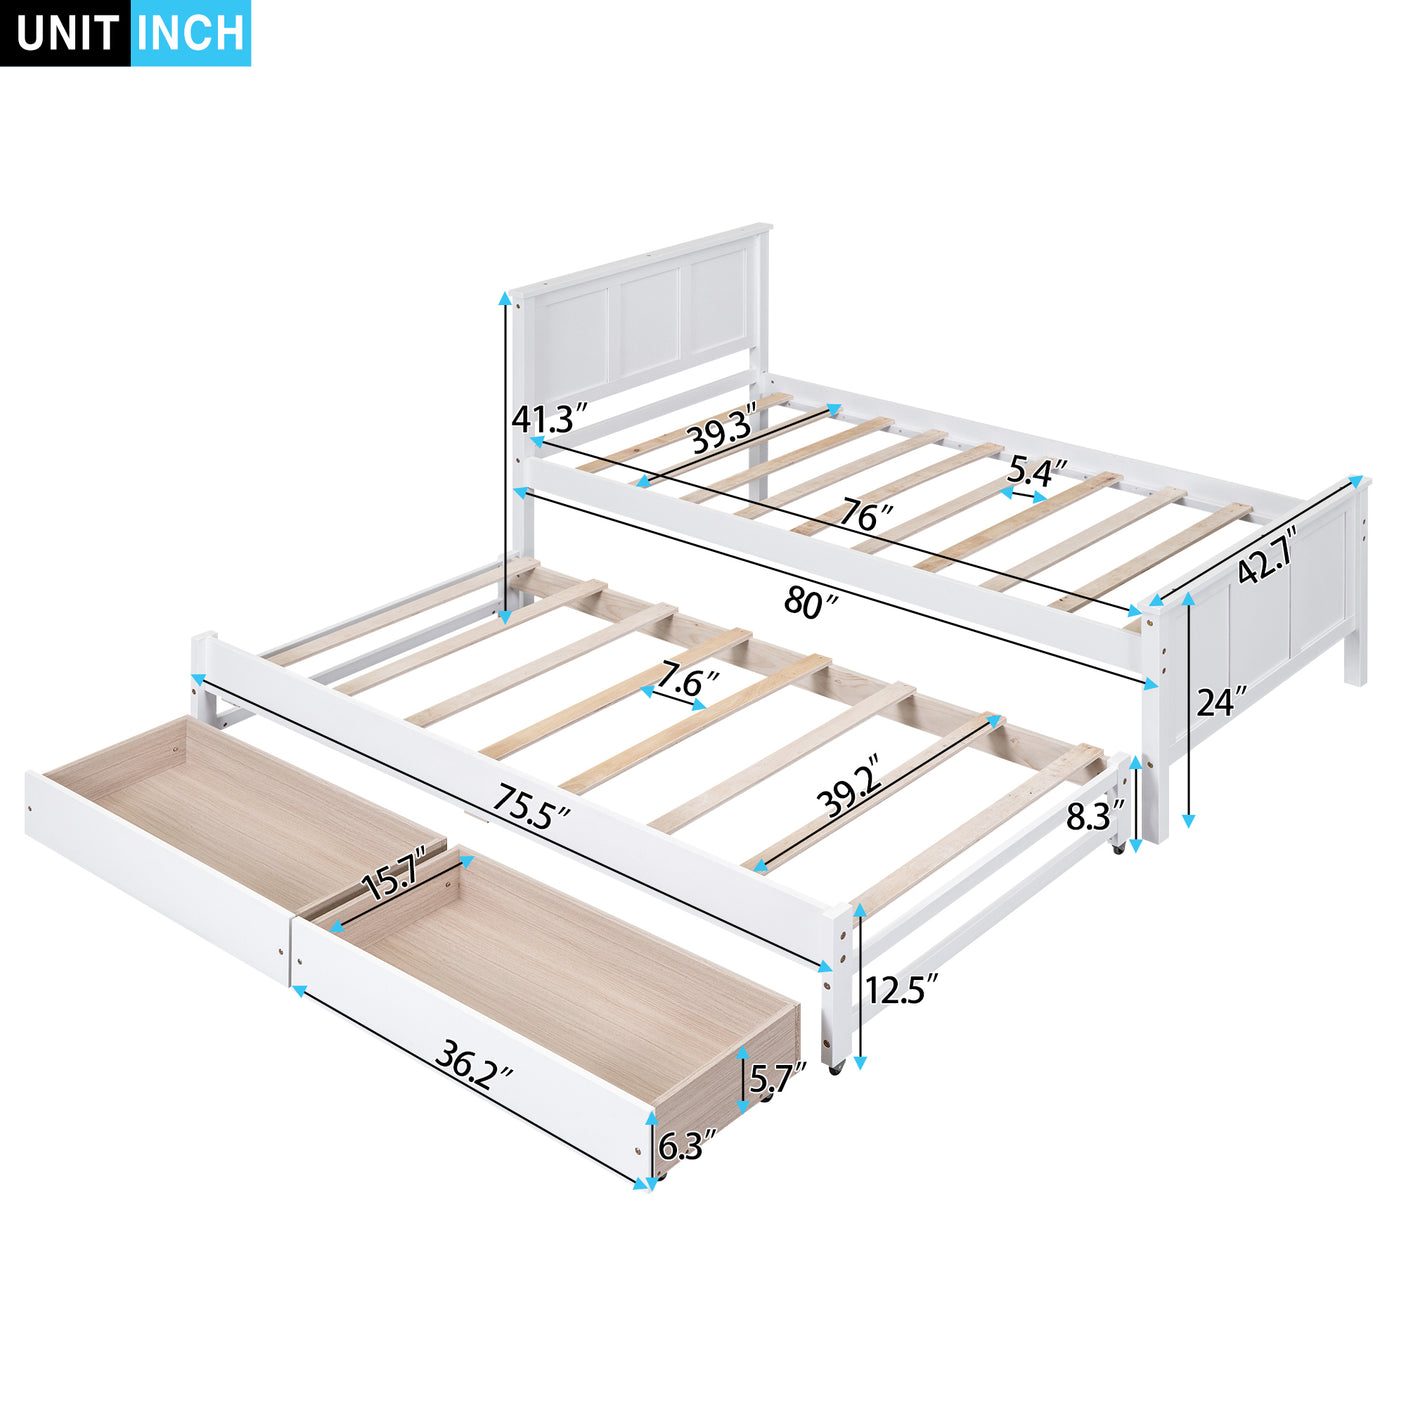 Twin Size Platform Bed with Trundle and Drawers, White - Home Elegance USA